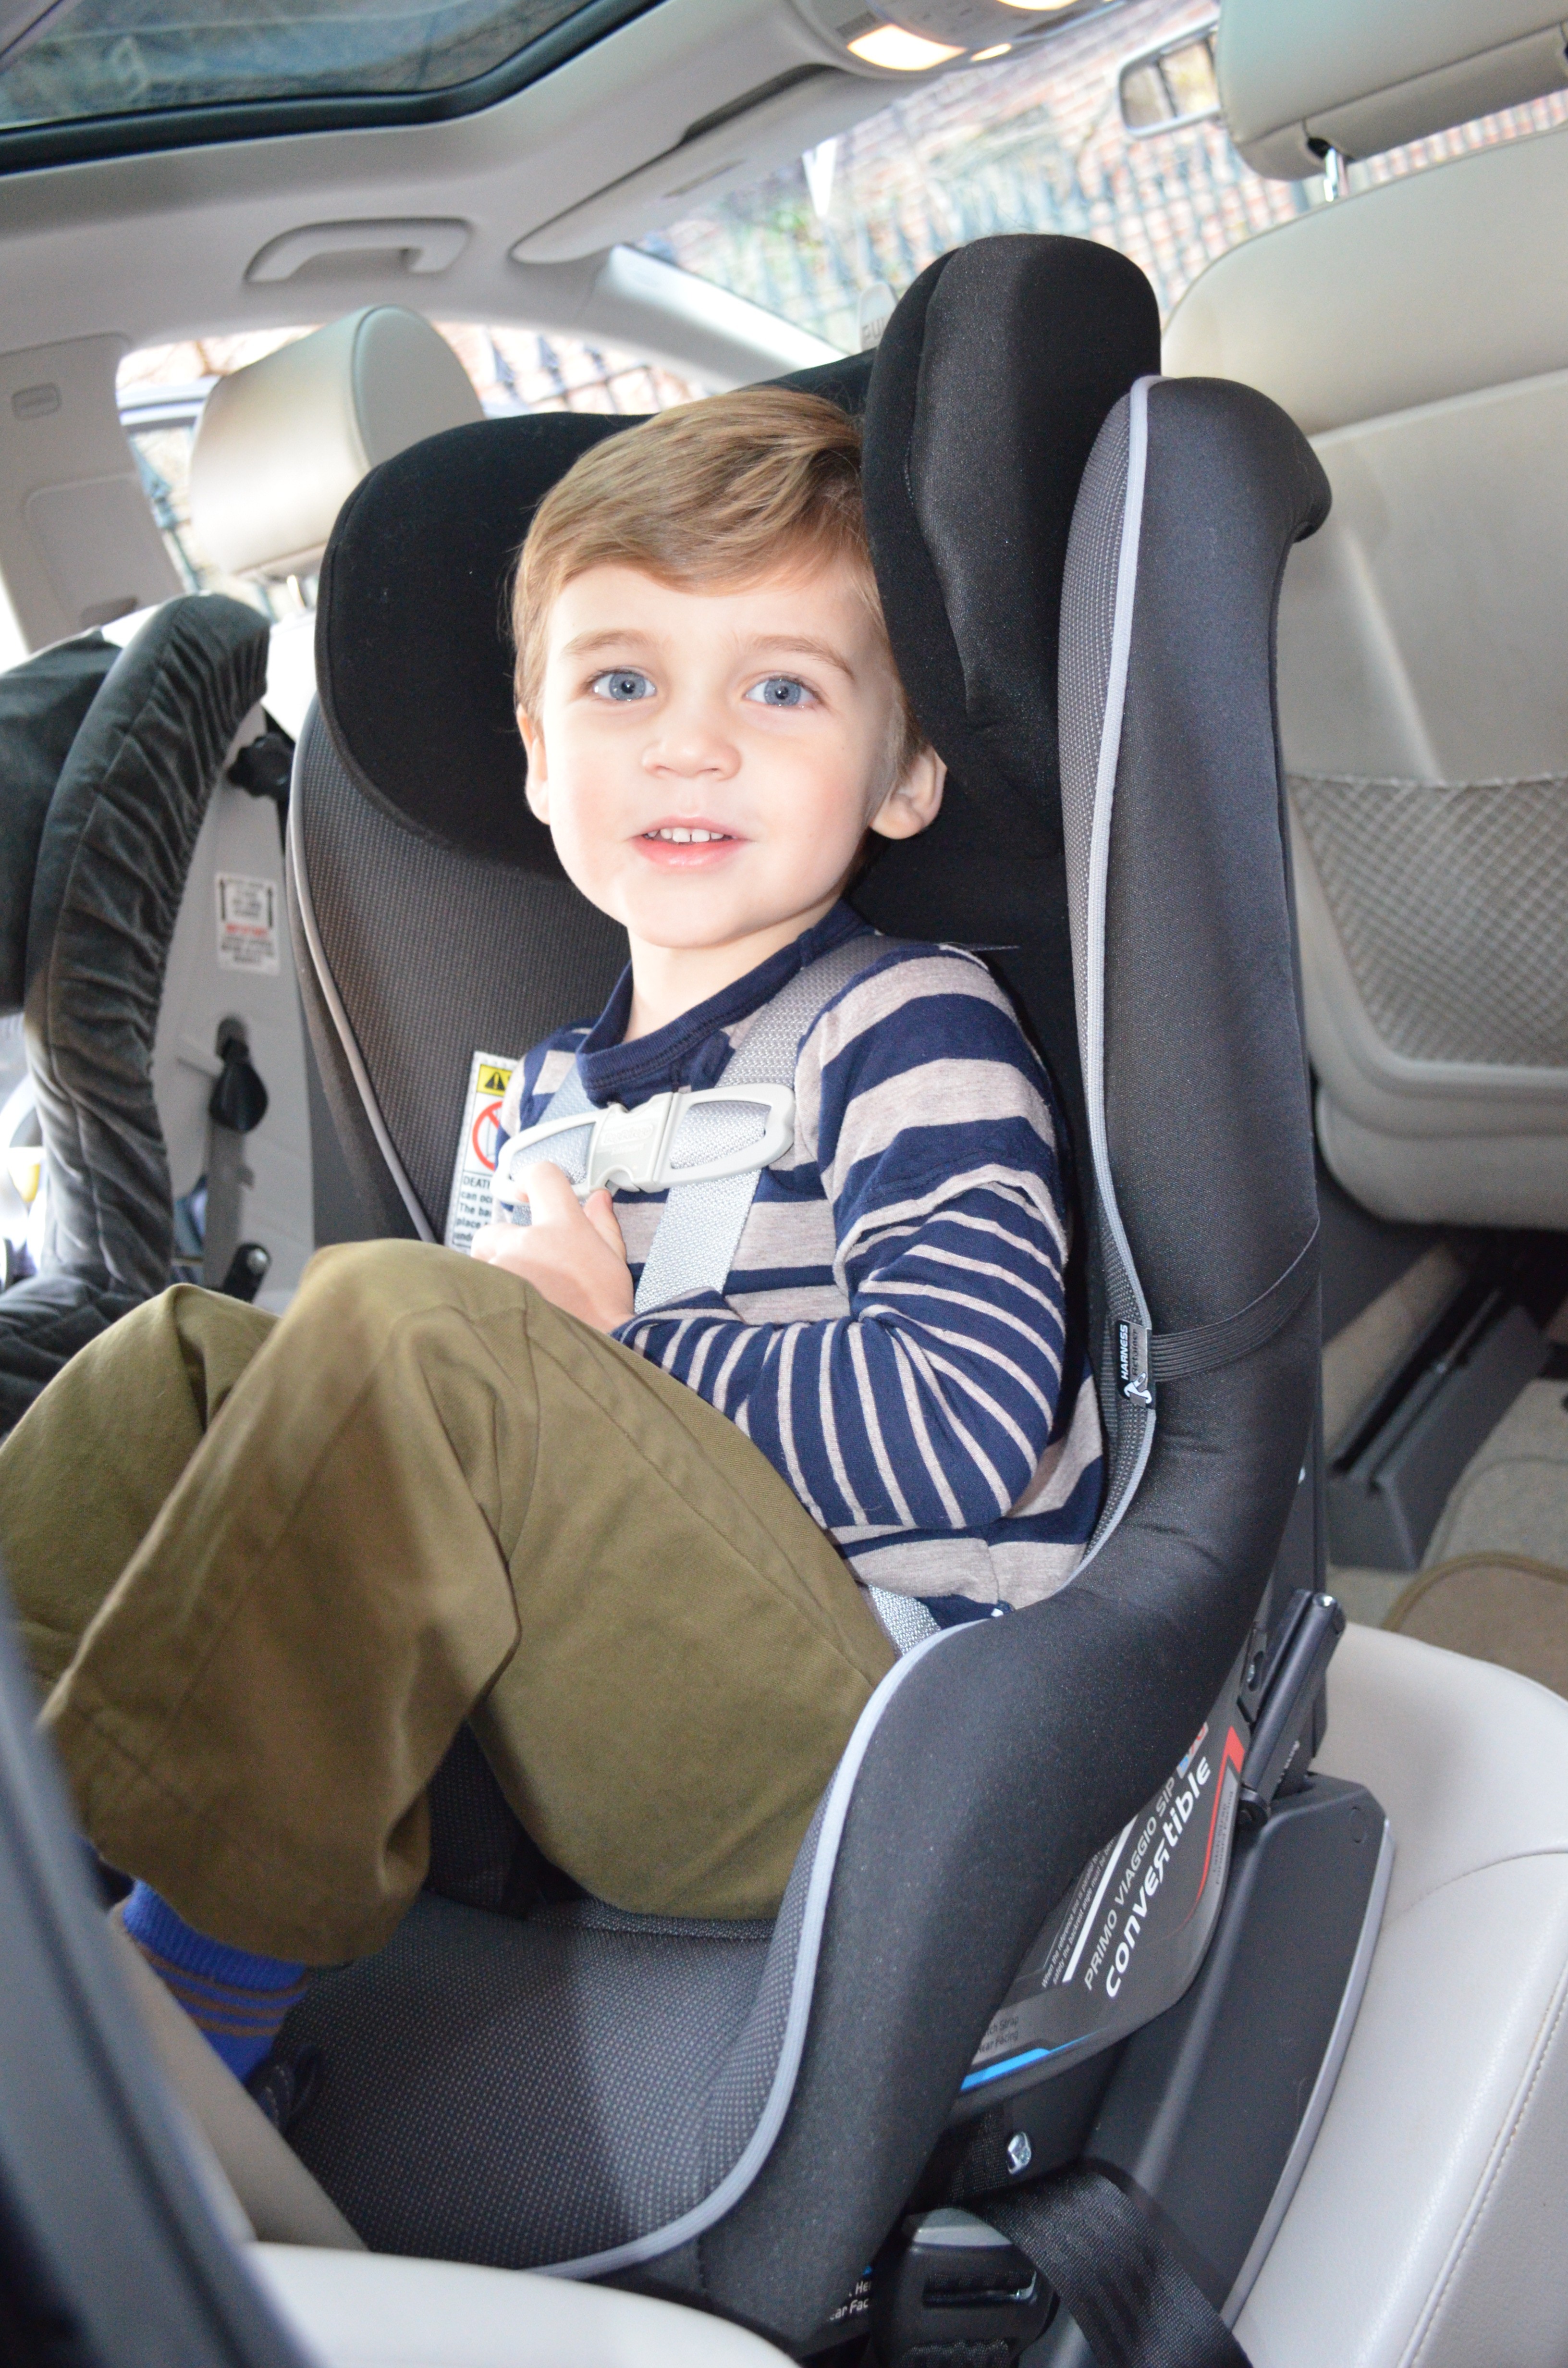 Your Child Turn Forward Facing, When To Change Car Seat Face Forward